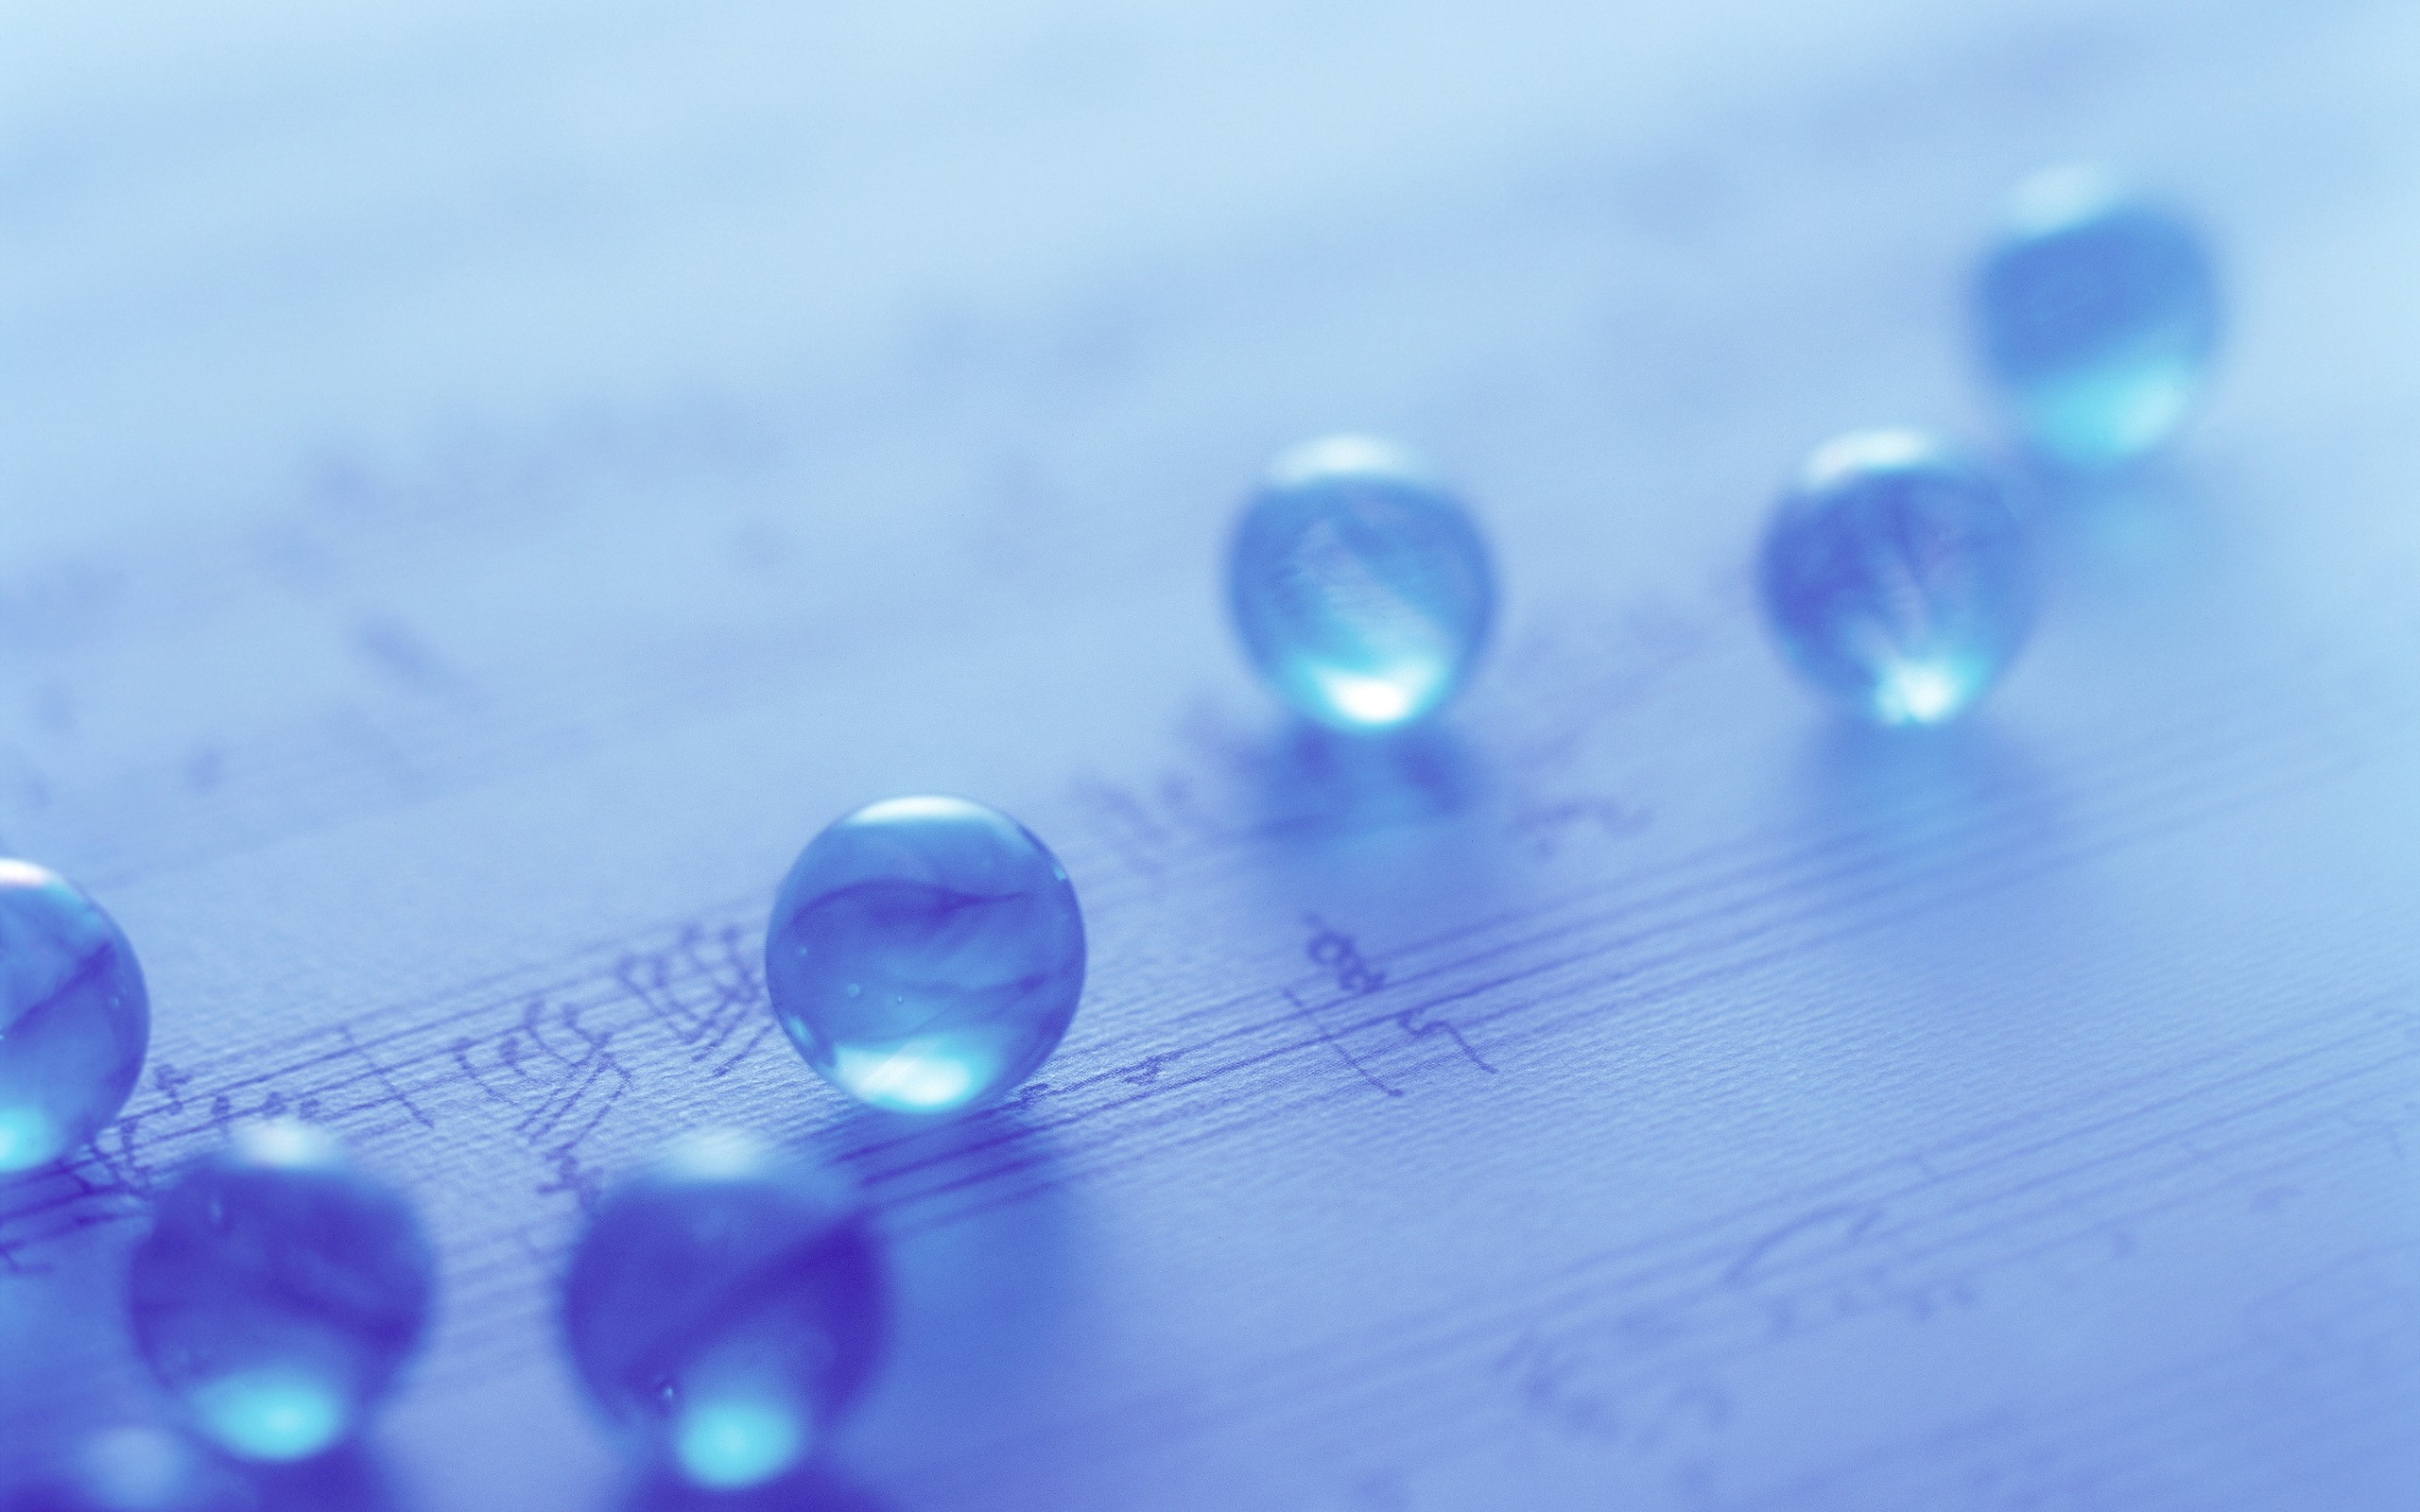 2560x1600 Wallpaper : water, sphere, blue, glass, circle, beads, Music Sheet, color, drop, petal, close up, macro photography, moisture, liquid bubble ludendorf 13487 HD Wallpapers